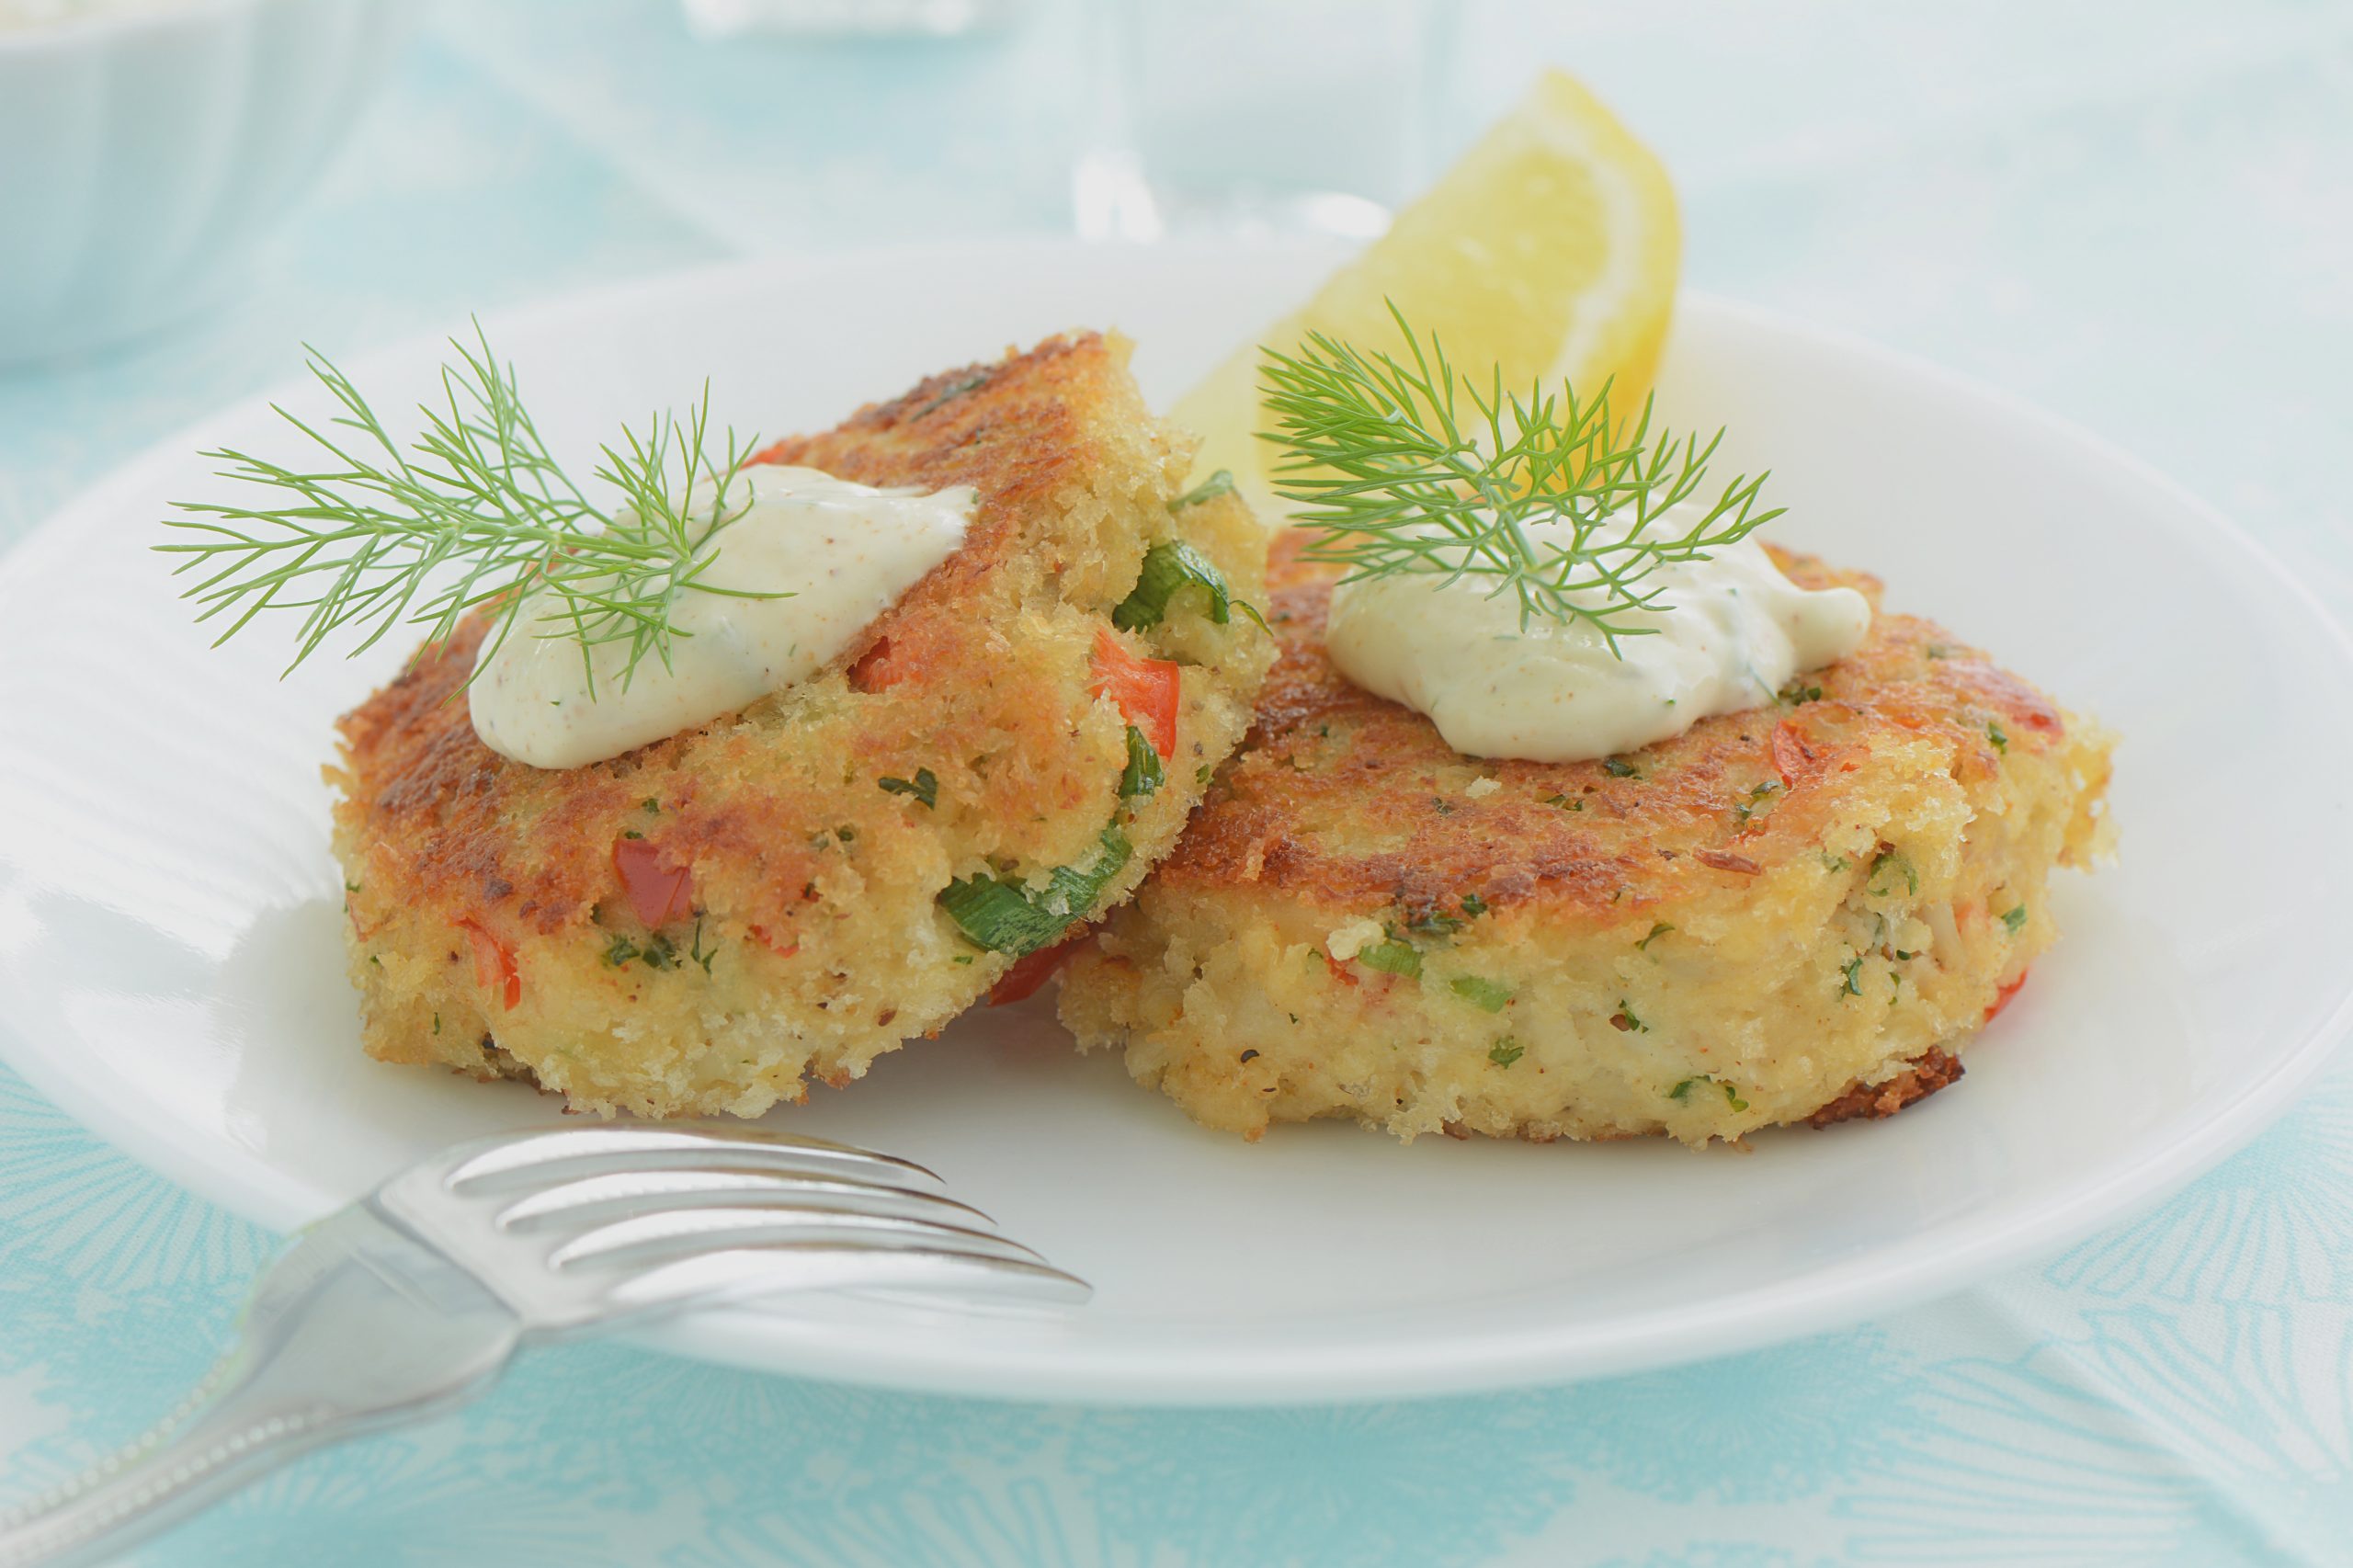 What To Serve With Crab Cakes?